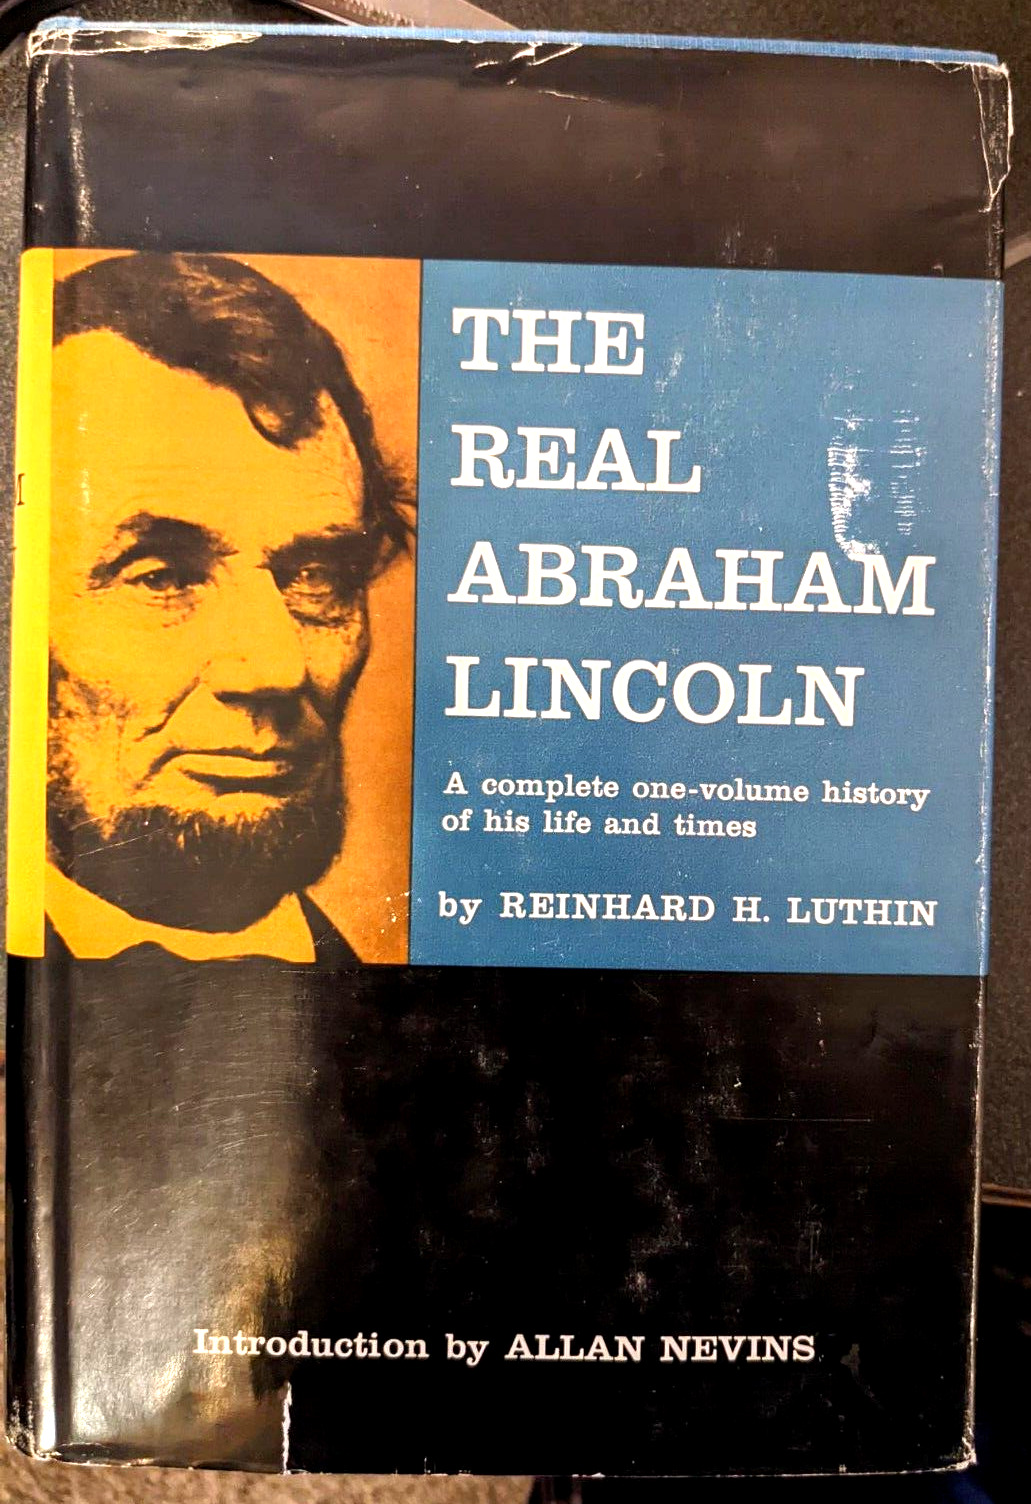 THE REAL ABRAHAM LINCOLN, VG+ W/Jacket, 1st Ed 1960, Rare, by Reihnhard B Luthin